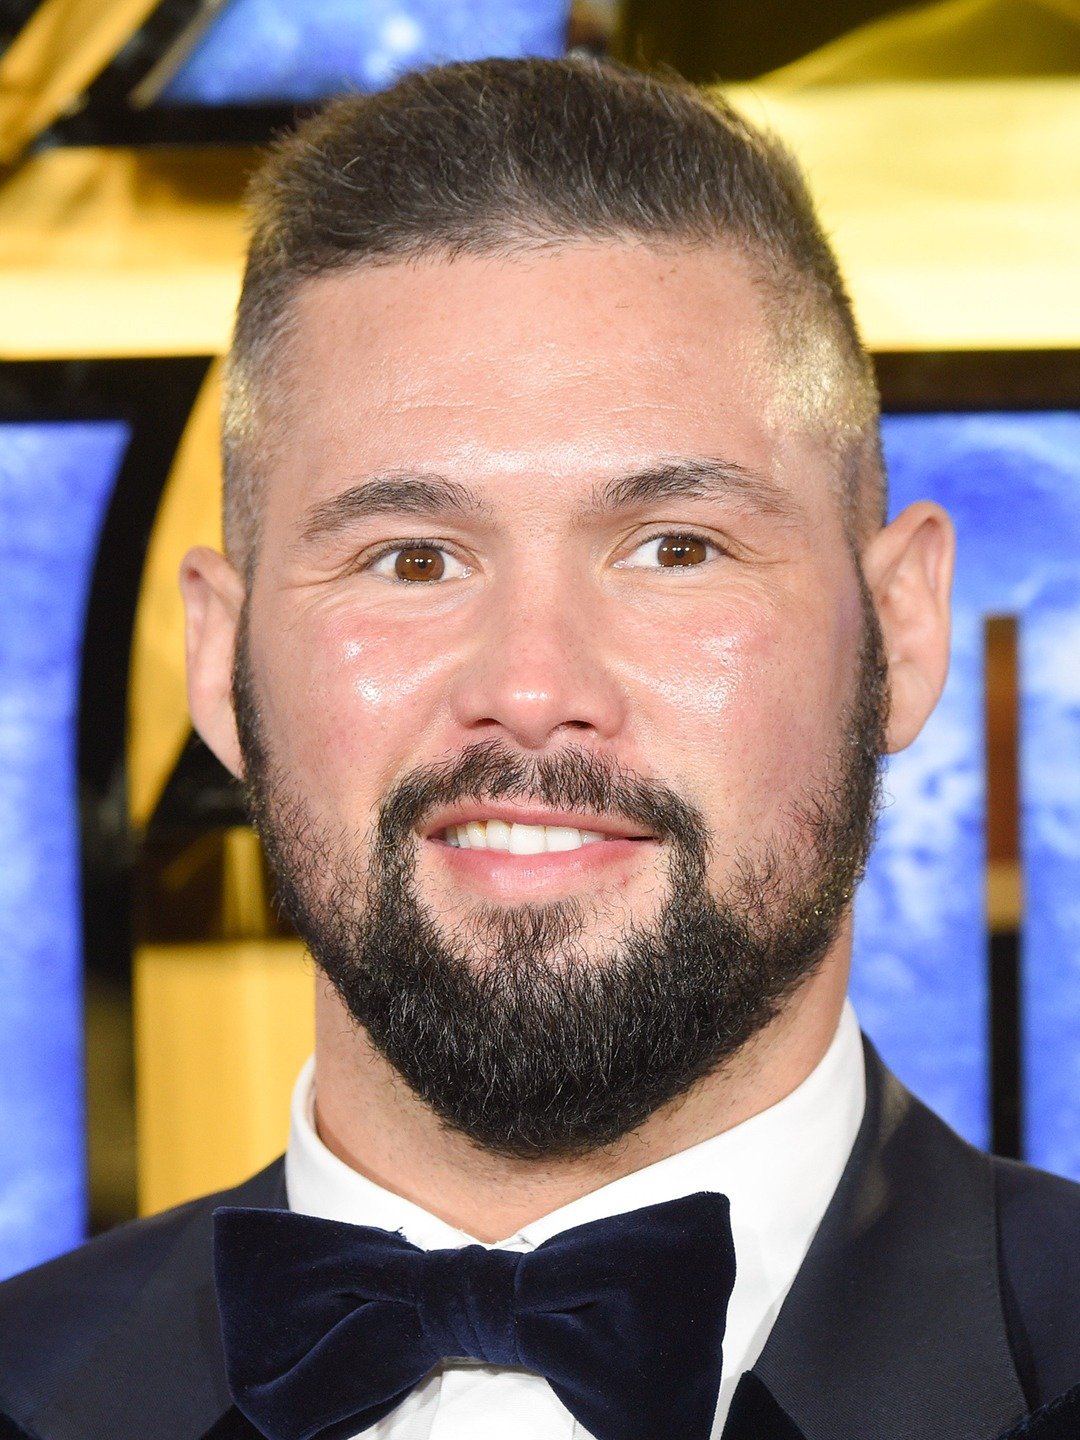 How tall is Tony Bellew?